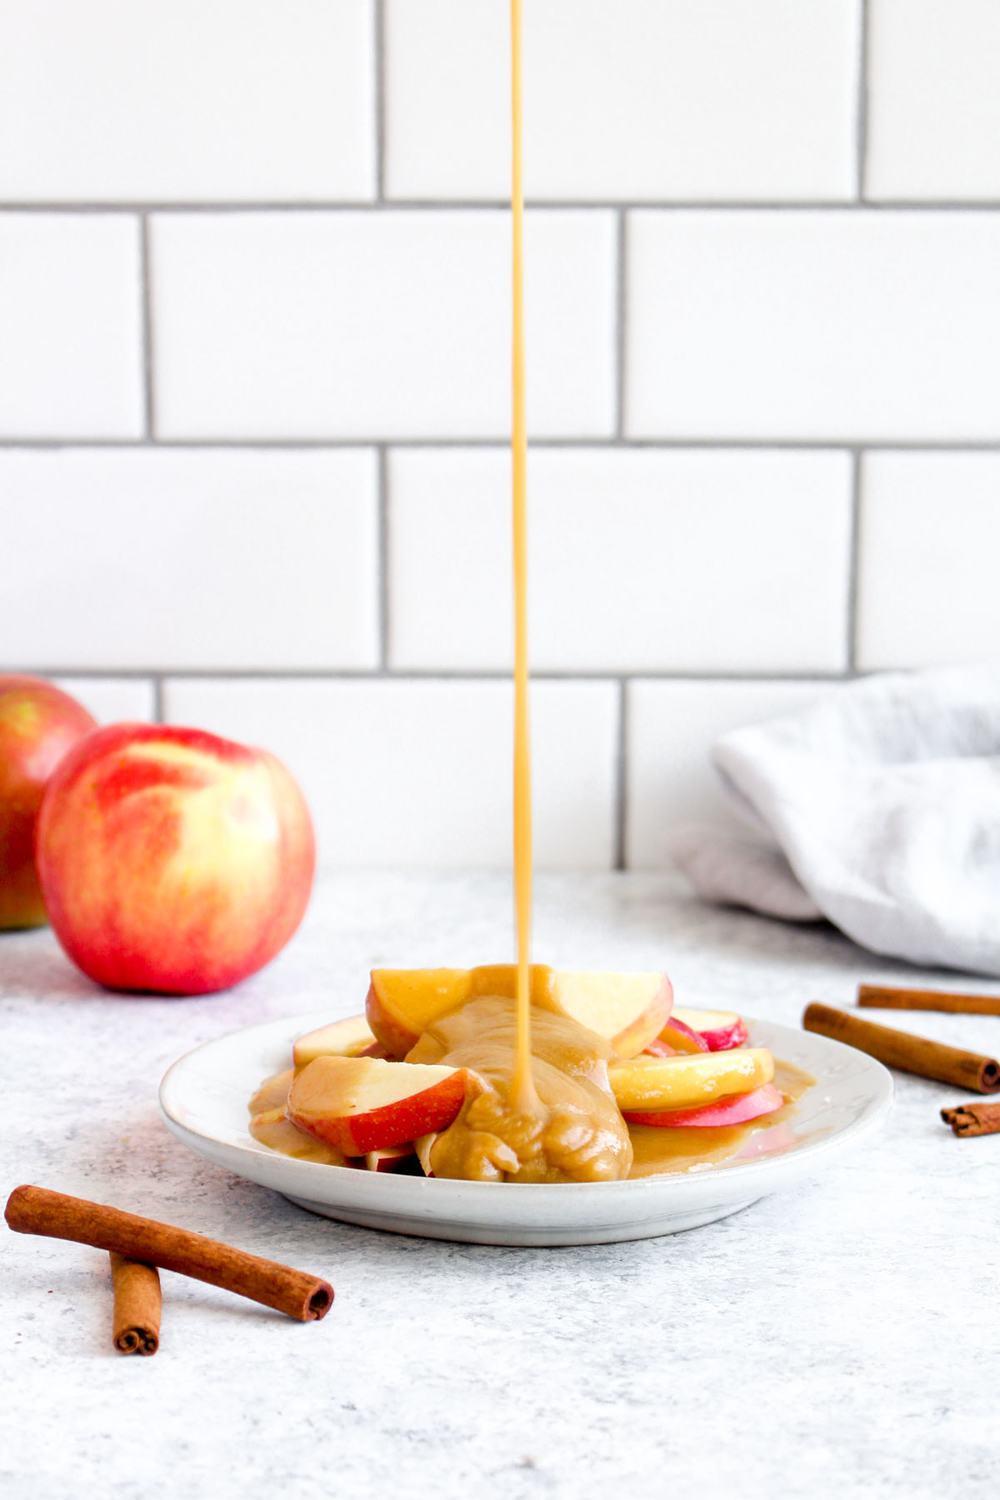 Healthy tahini caramel being poured over apple slices.